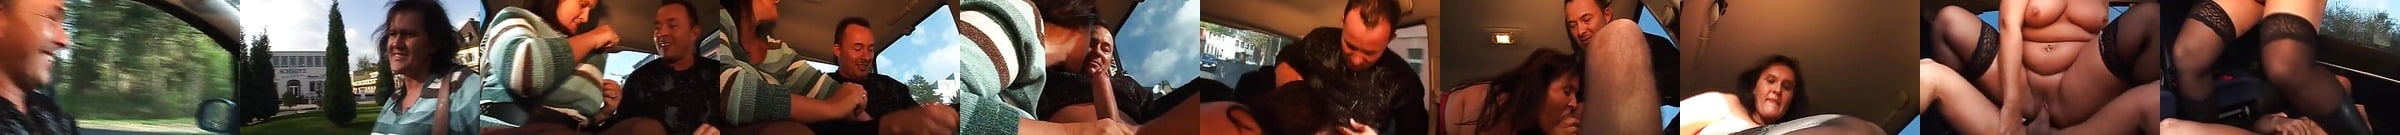 German Bbw Milf Fucked In The Back Of A Car Free Porn 5d